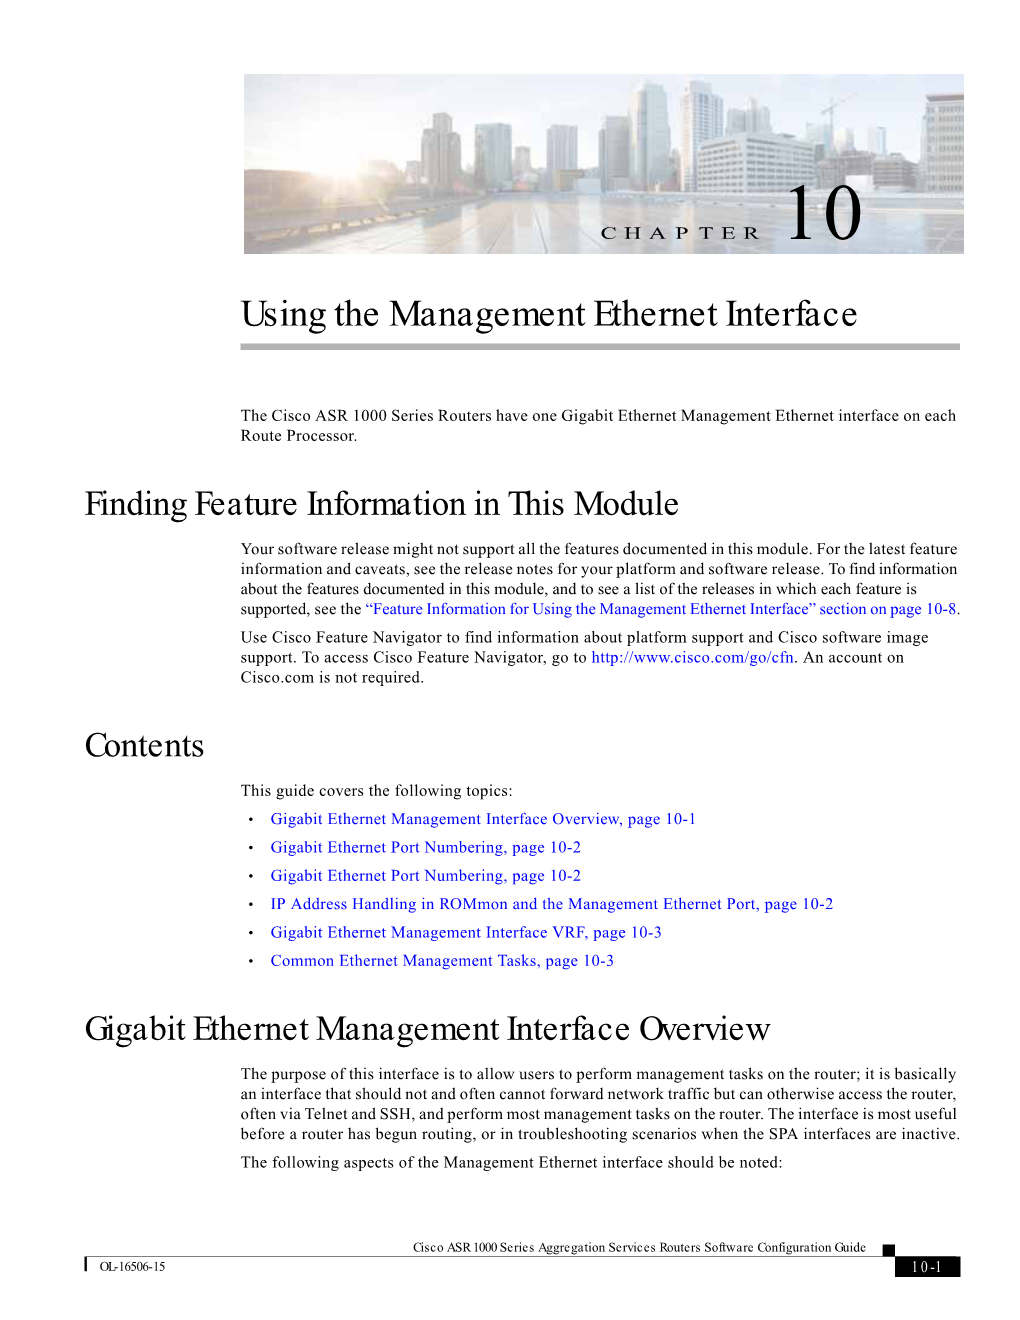 Using the Management Ethernet Interface